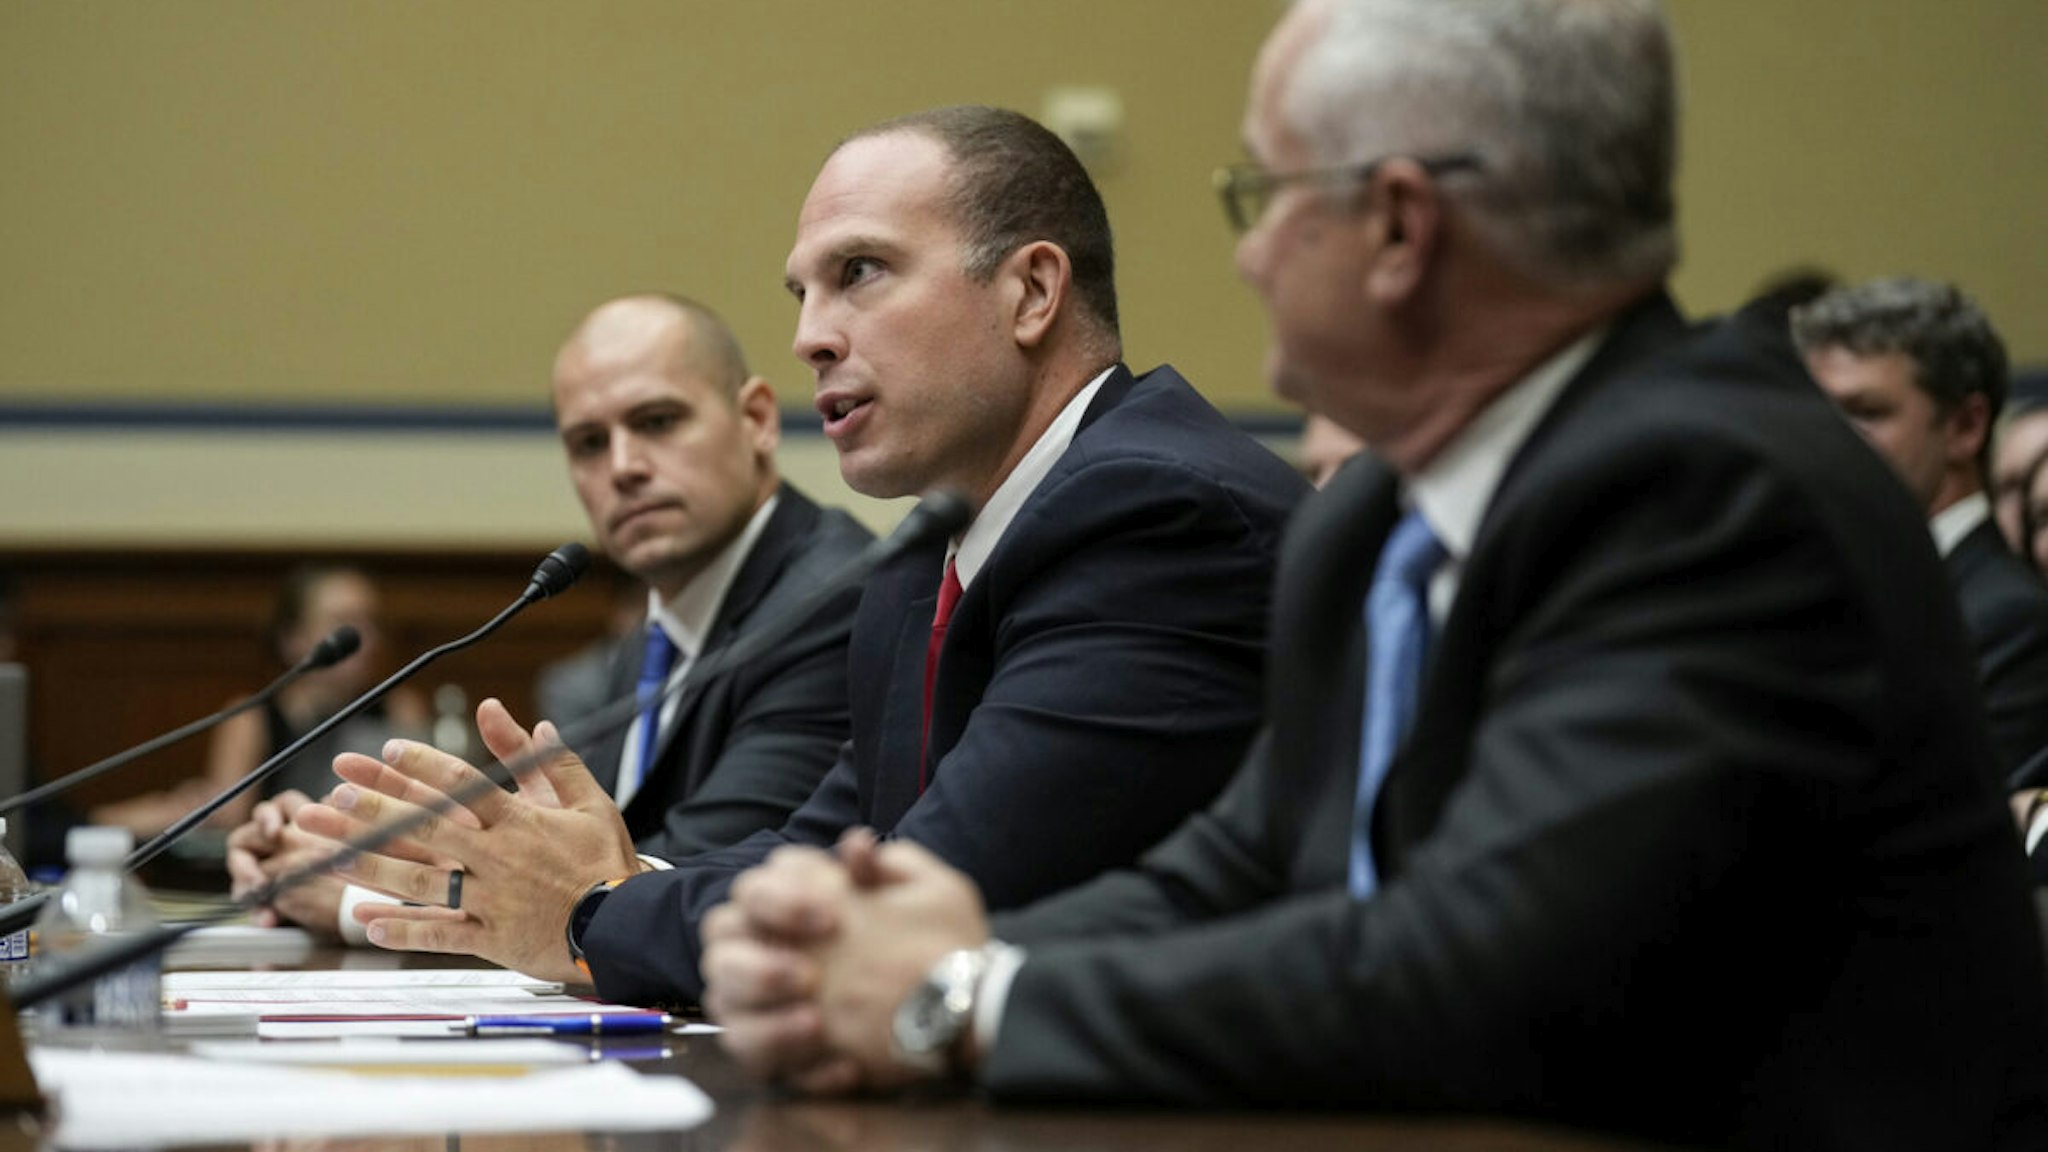 Ryan Graves, executive director of Americans for Safe Aerospace, David Grusch, former National Reconnaissance Officer Representative of Unidentified Anomalous Phenomena Task Force at the U.S. Department of Defense, and Retired Navy Commander David Fravor testify during a House Oversight Committee hearing titled "Unidentified Anomalous Phenomena: Implications on National Security, Public Safety, and Government Transparency" on Capitol Hill 26, 2023 in Washington, DC.